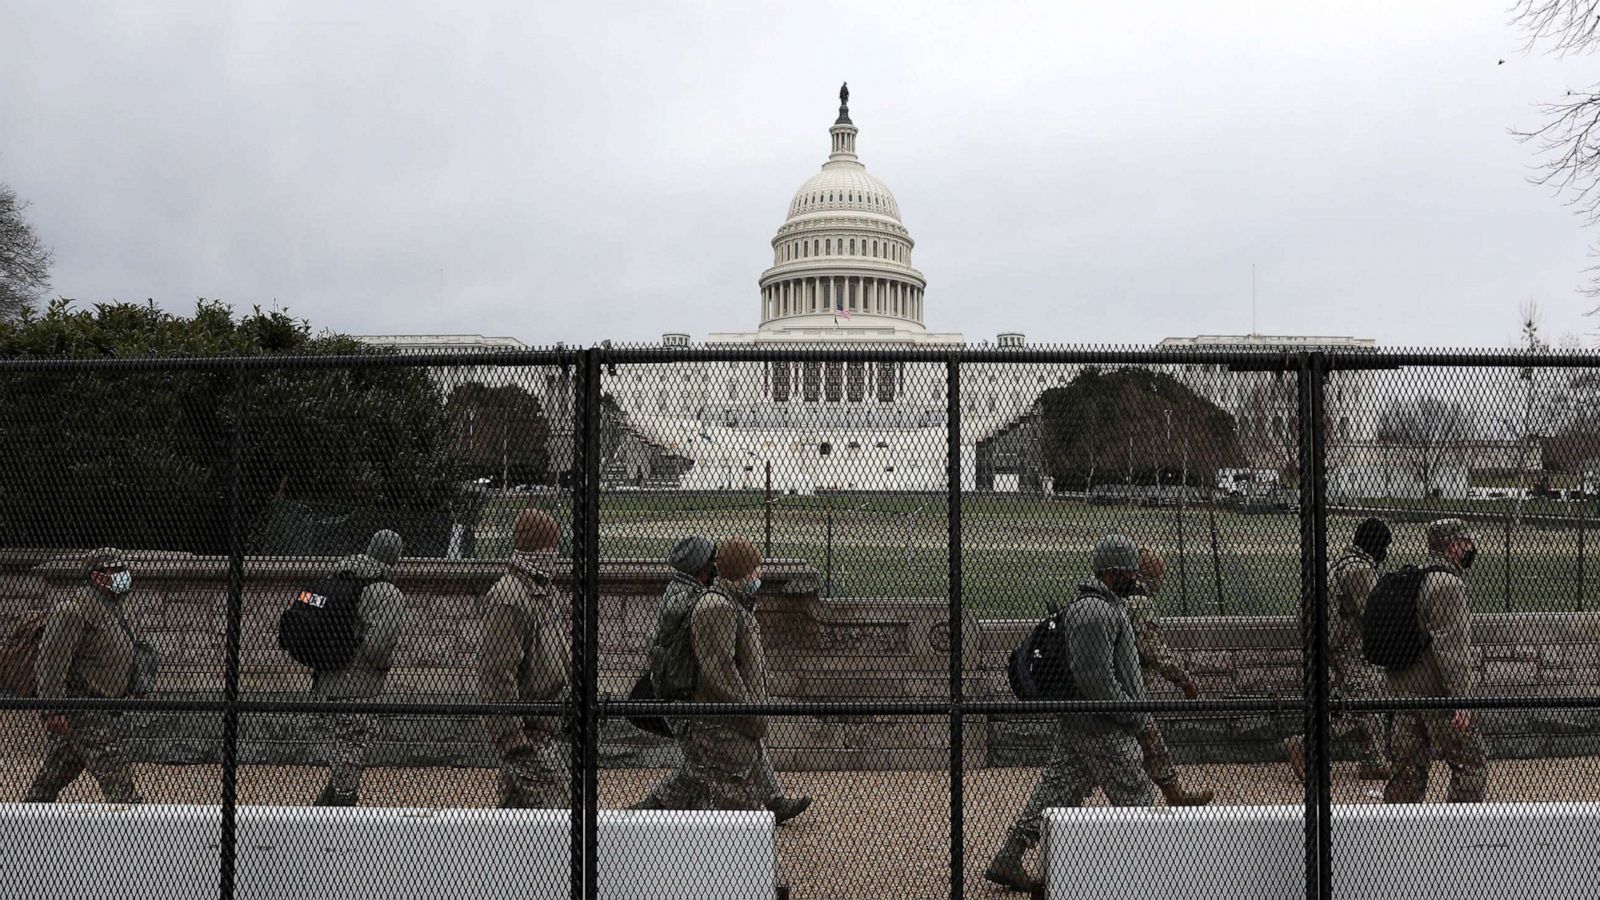 Non-scalable fencing erected around Capitol, security ramped up after mob attack